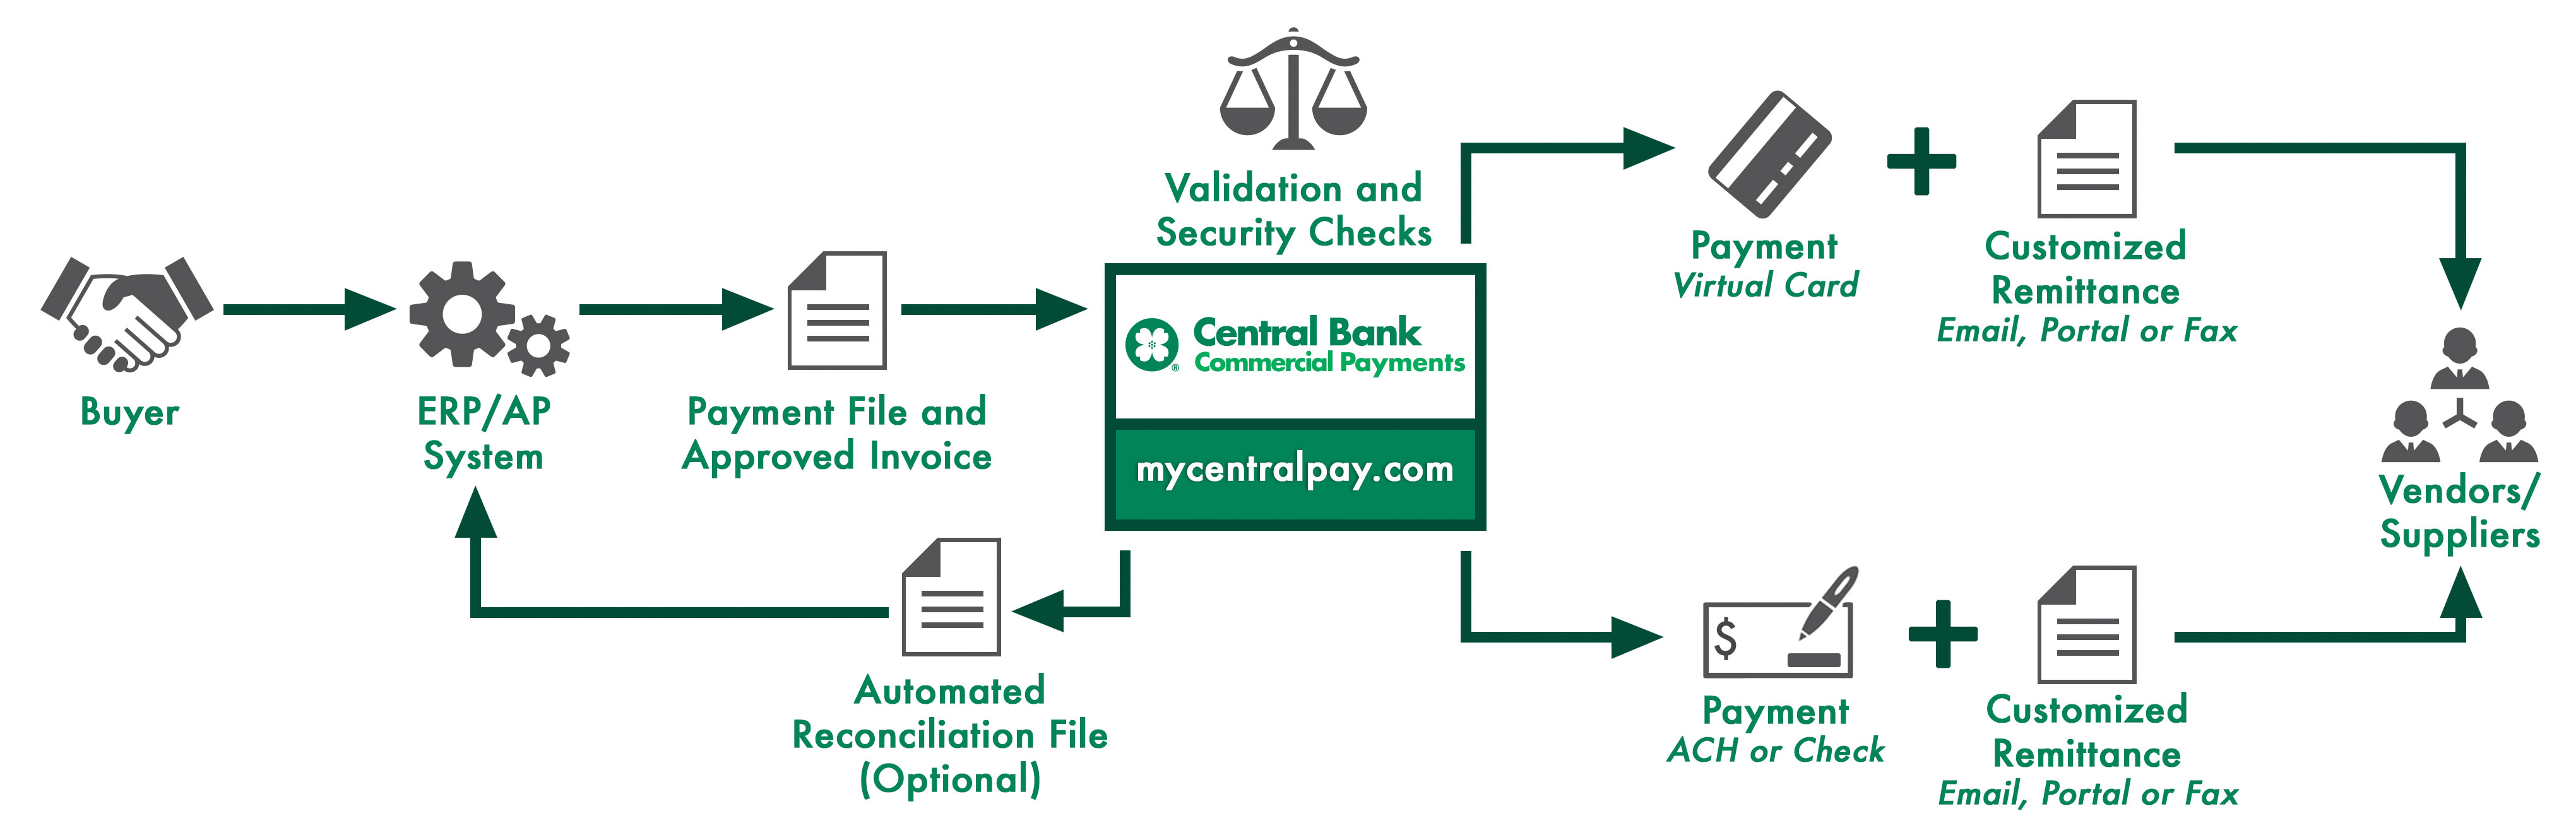 a flow chart of how the Commercial Payments solution works